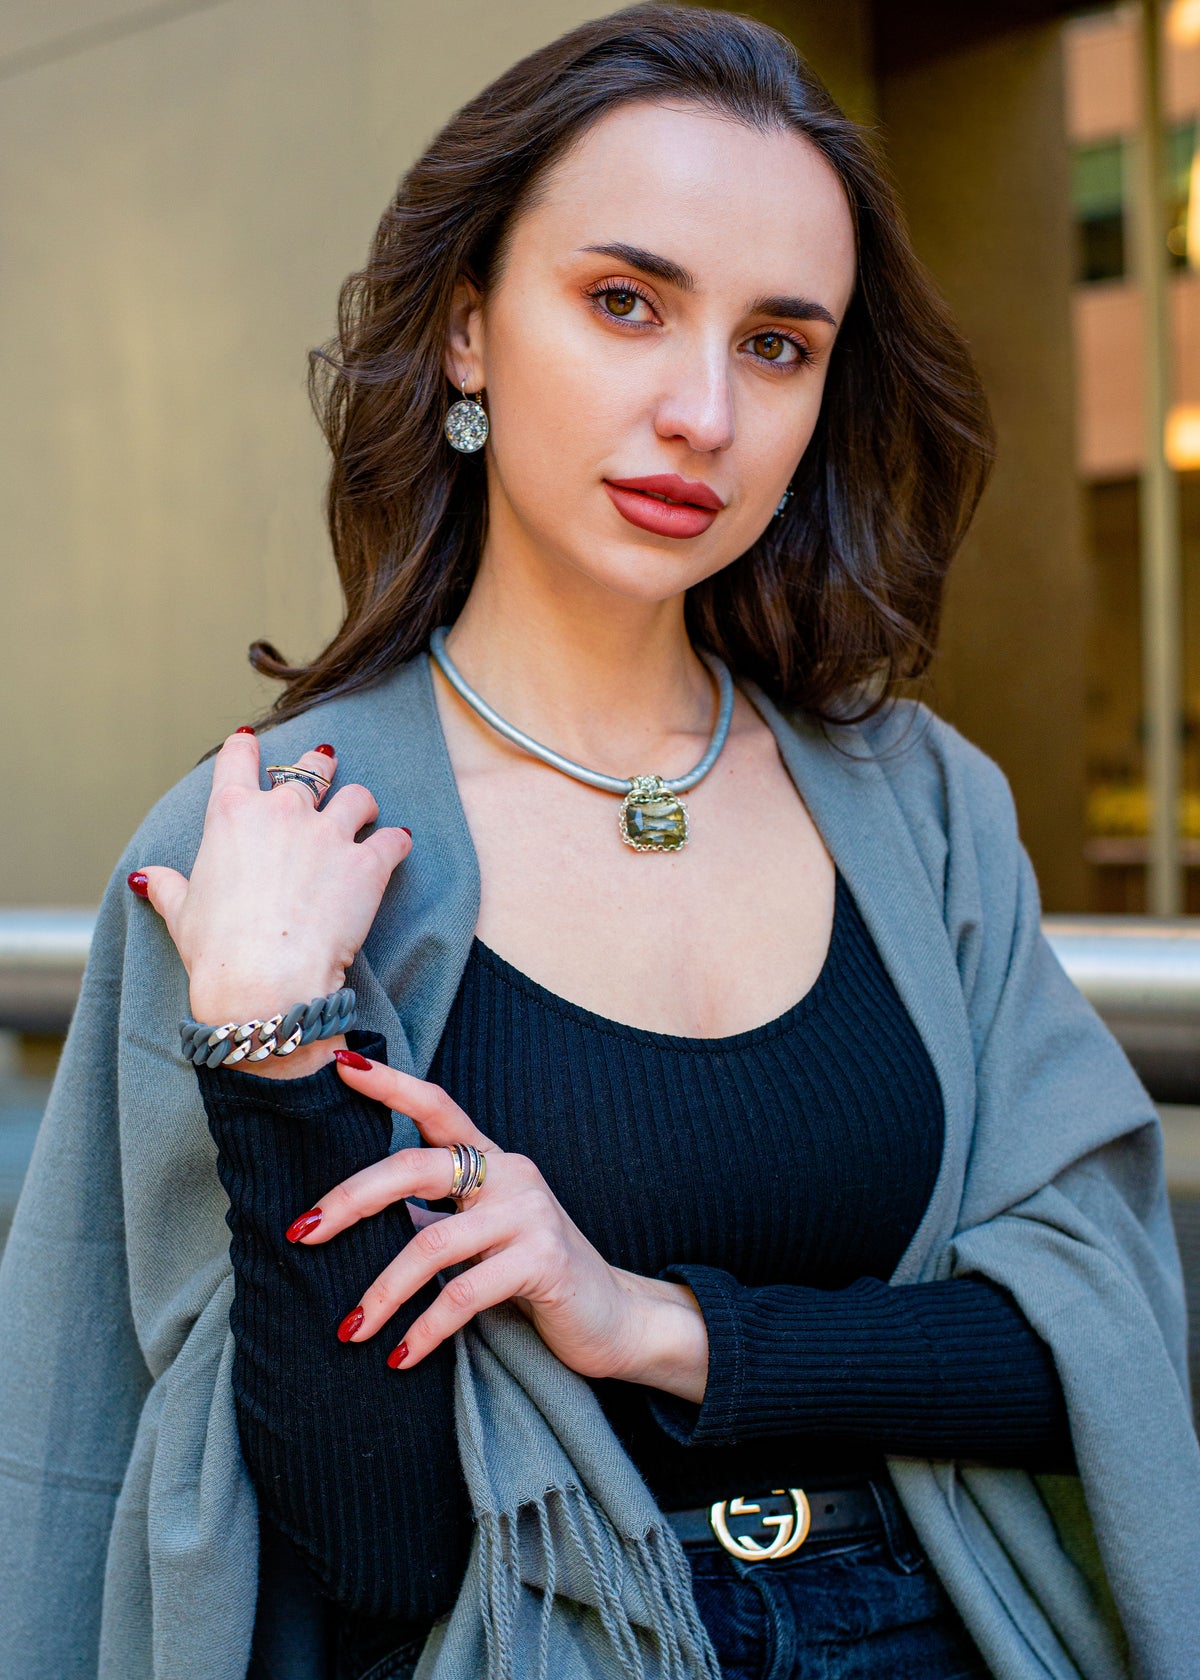 Handmade Jewelry from Israel. Chic Necklaces, meditation rings, stackable rings and bracelets and sterling silver earrings